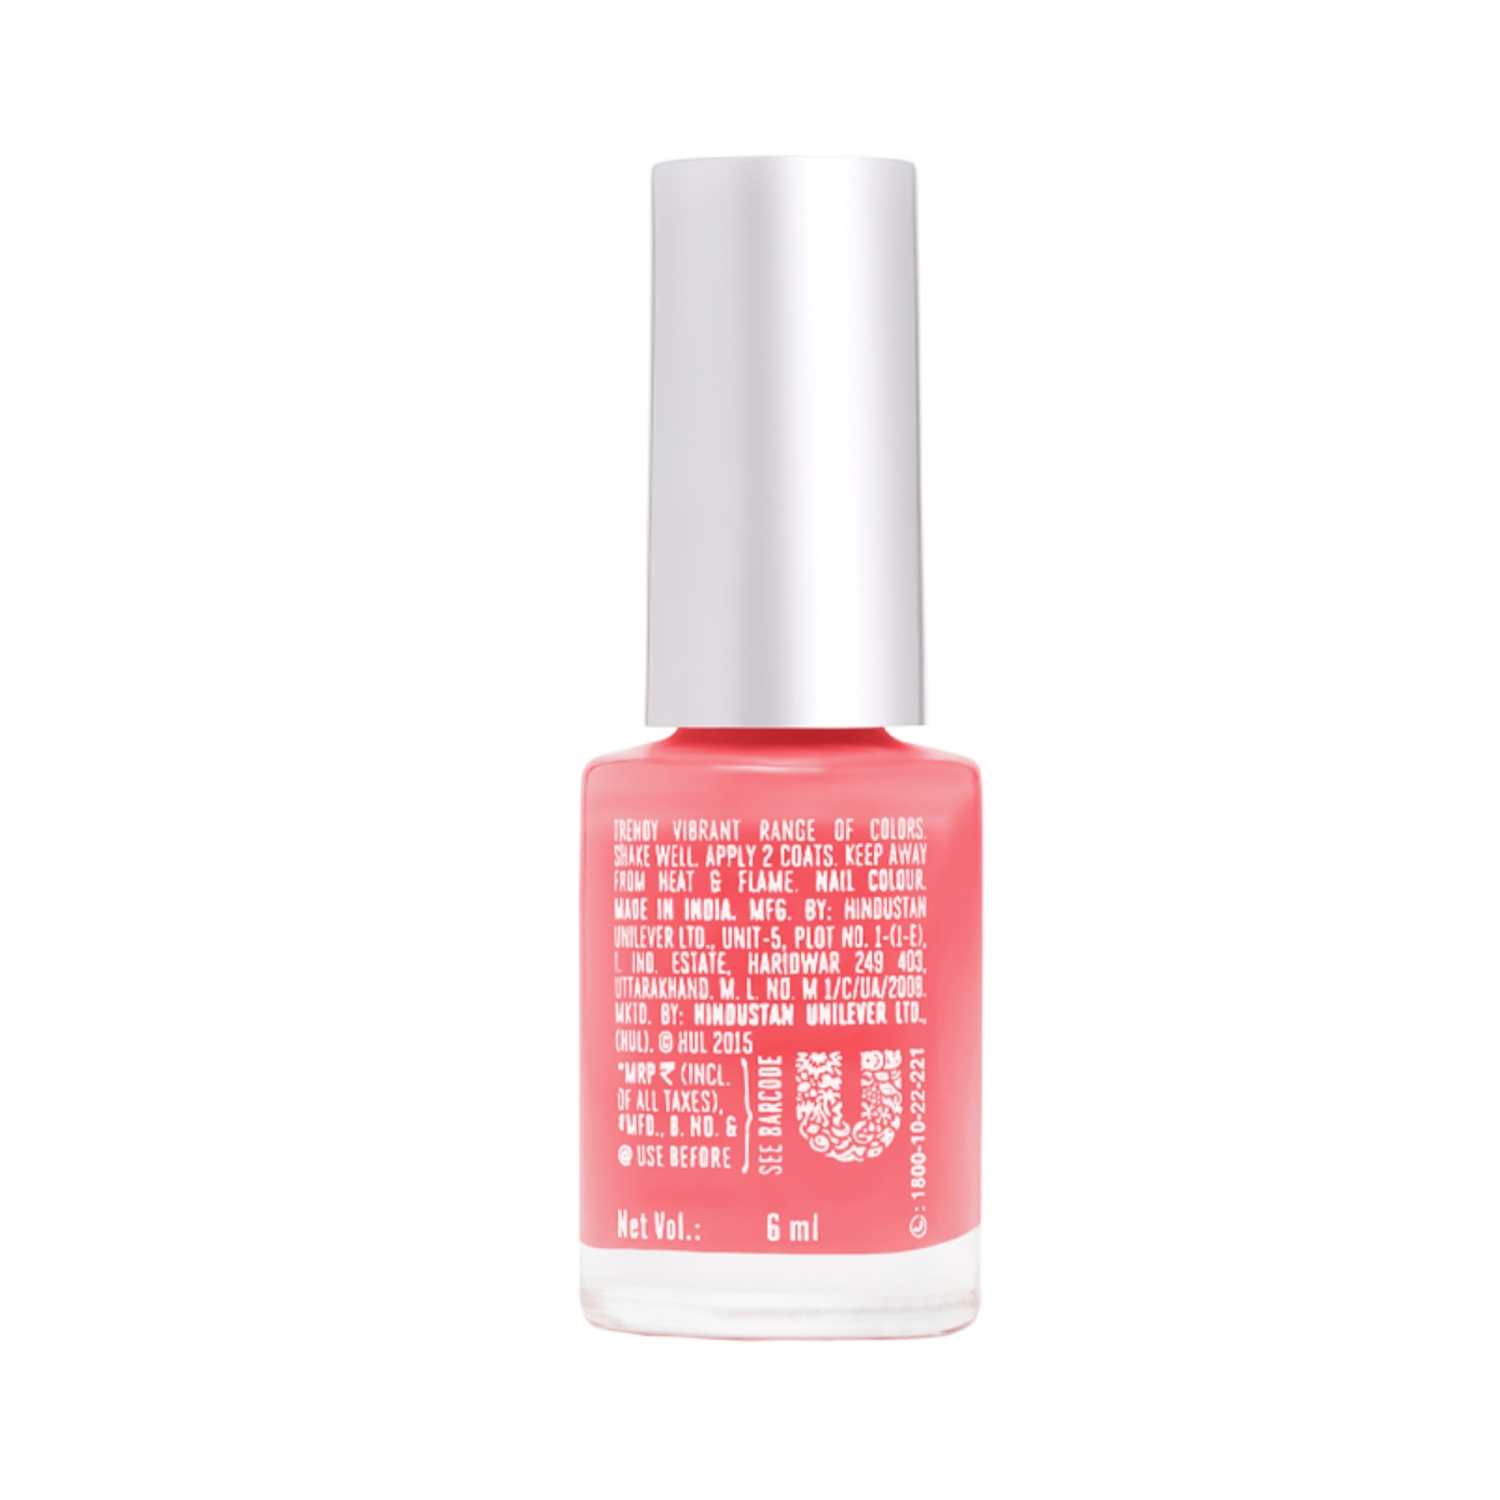 Buy Lakmé Nail Color Remover, 27ml Online at Low Prices in India - Amazon.in